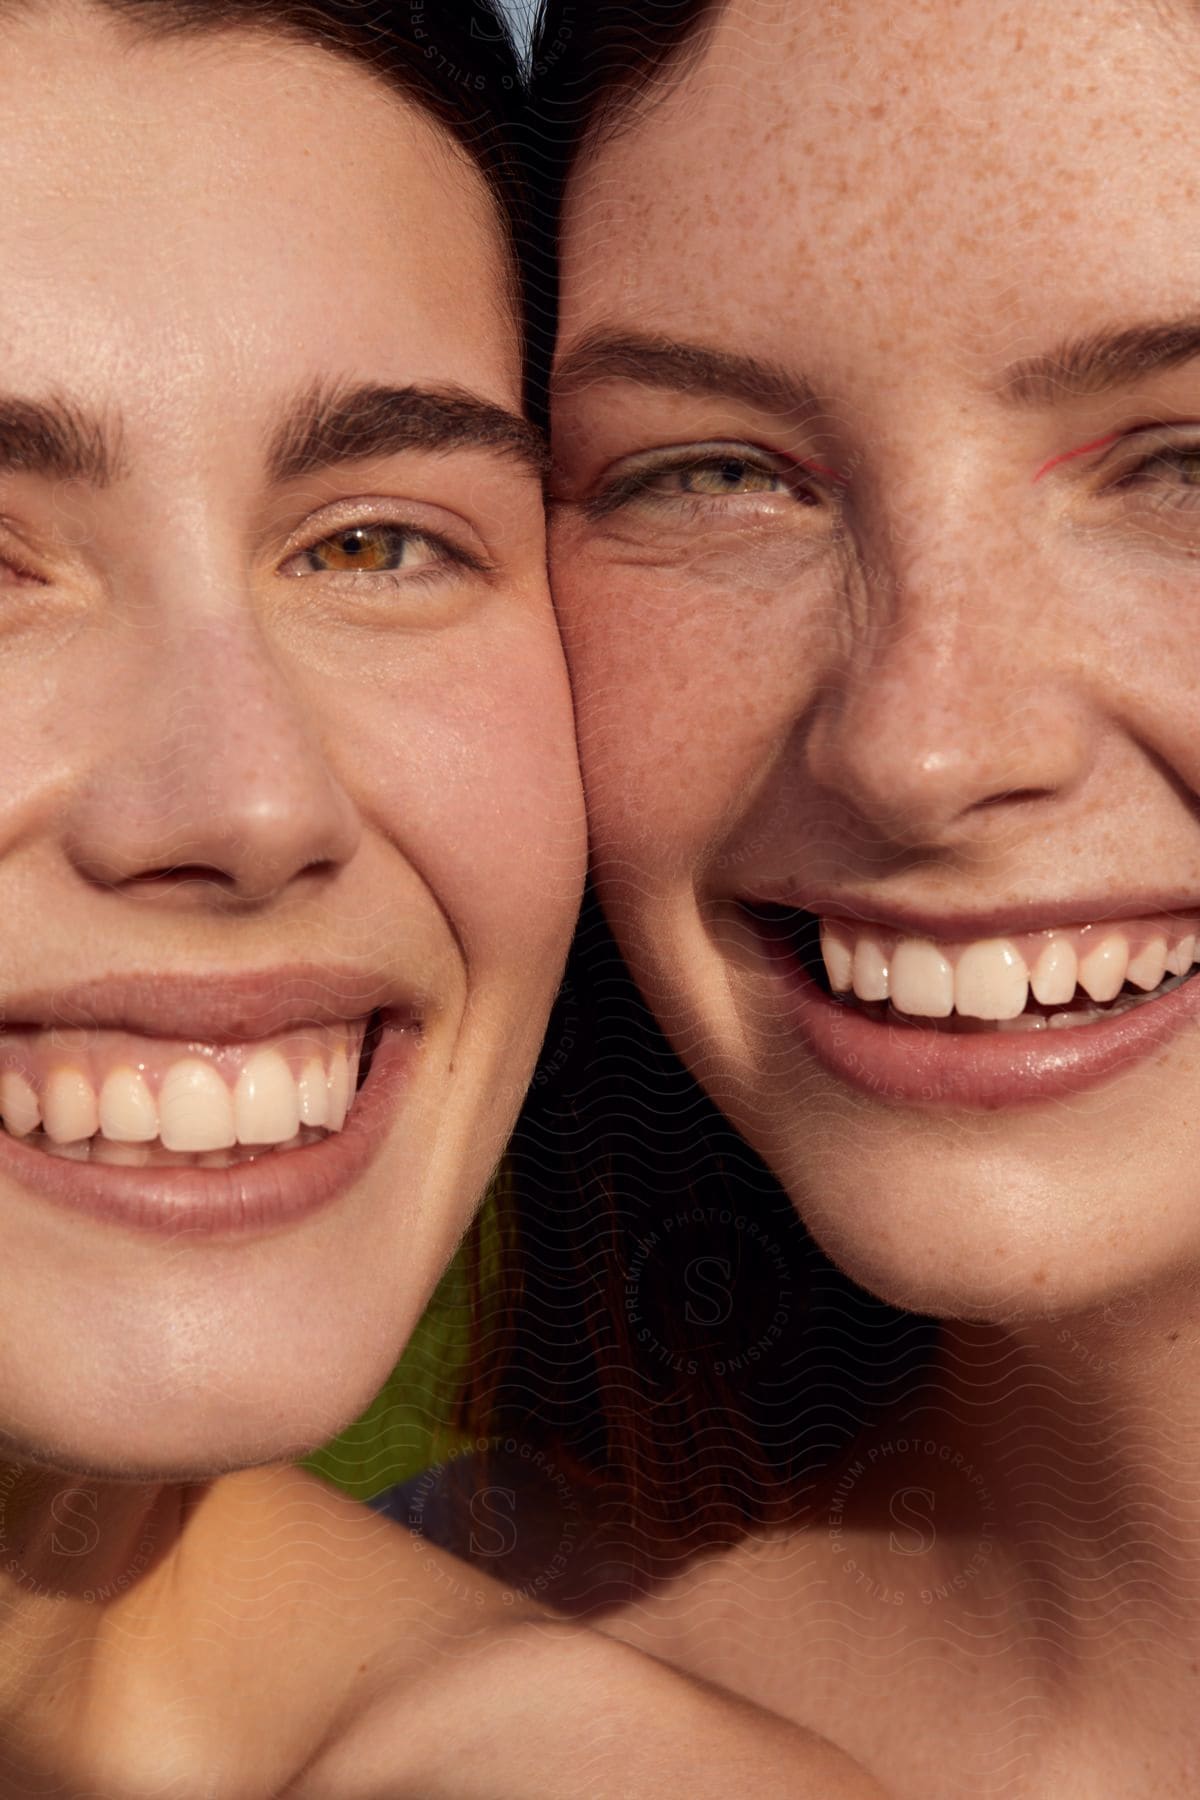 The face of two young women who are smiling and their faces have natural lighting.